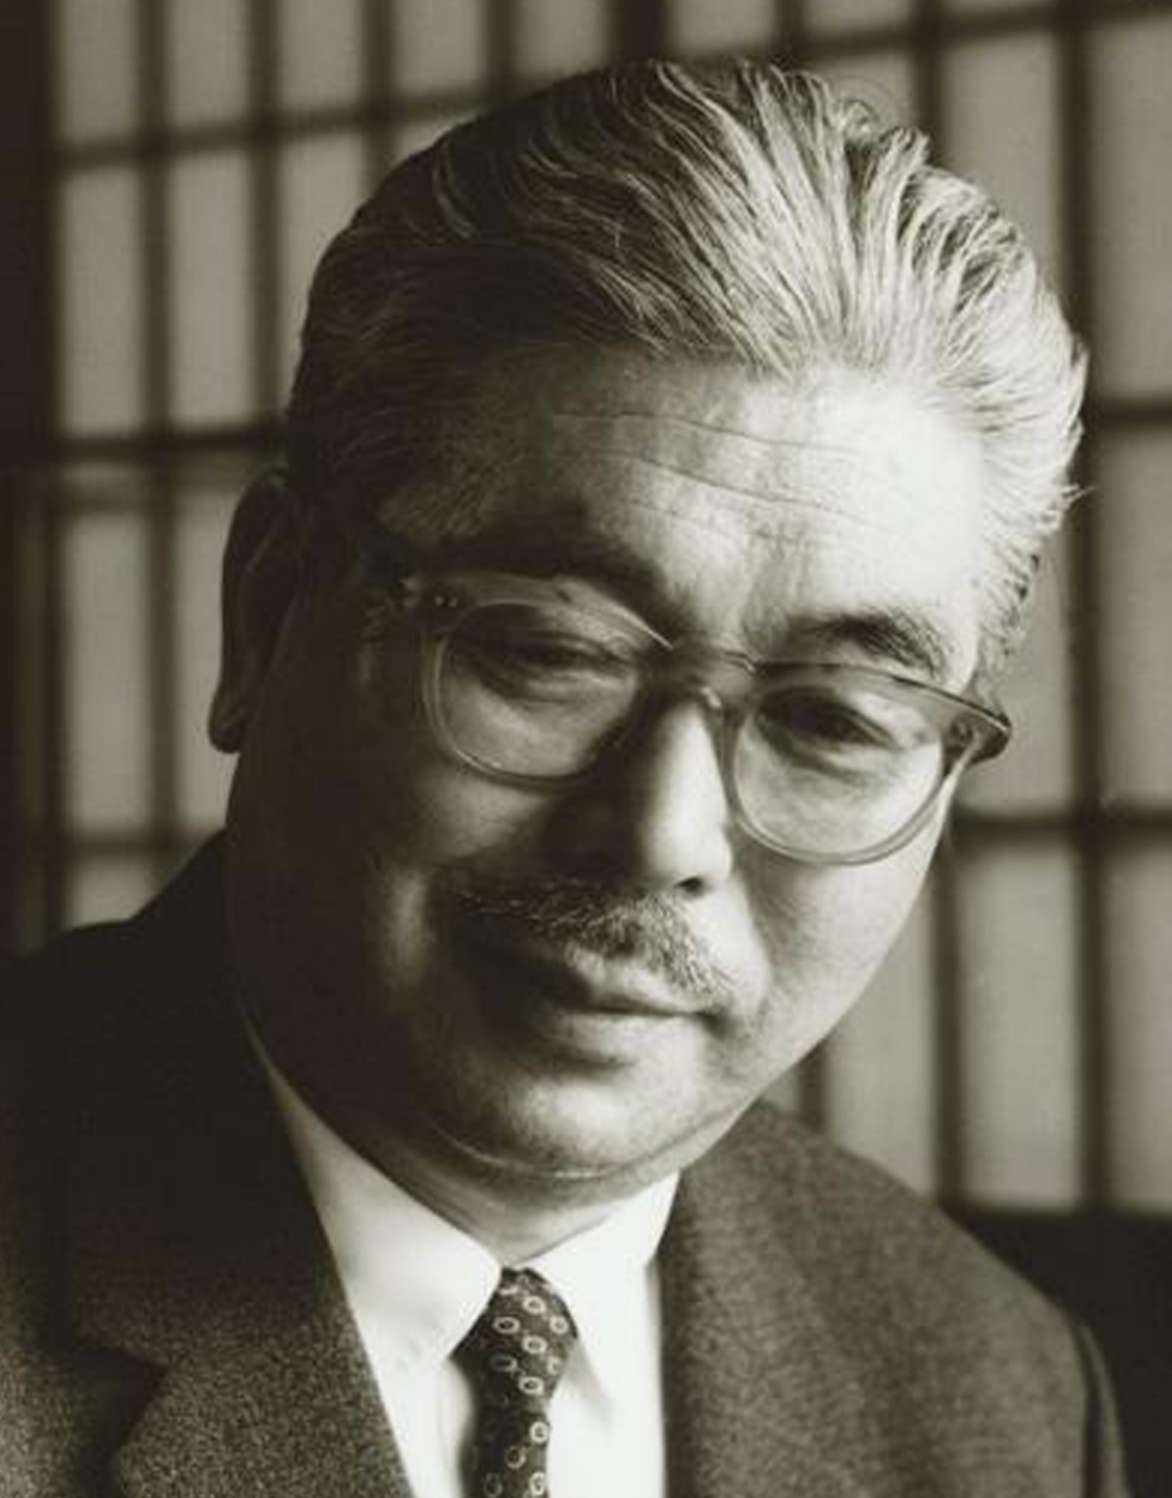 Shinjo, white haired, mustachioed, and wearing glasses, sits for a portrait in a suit, with a kindly, reflective expression on his face.